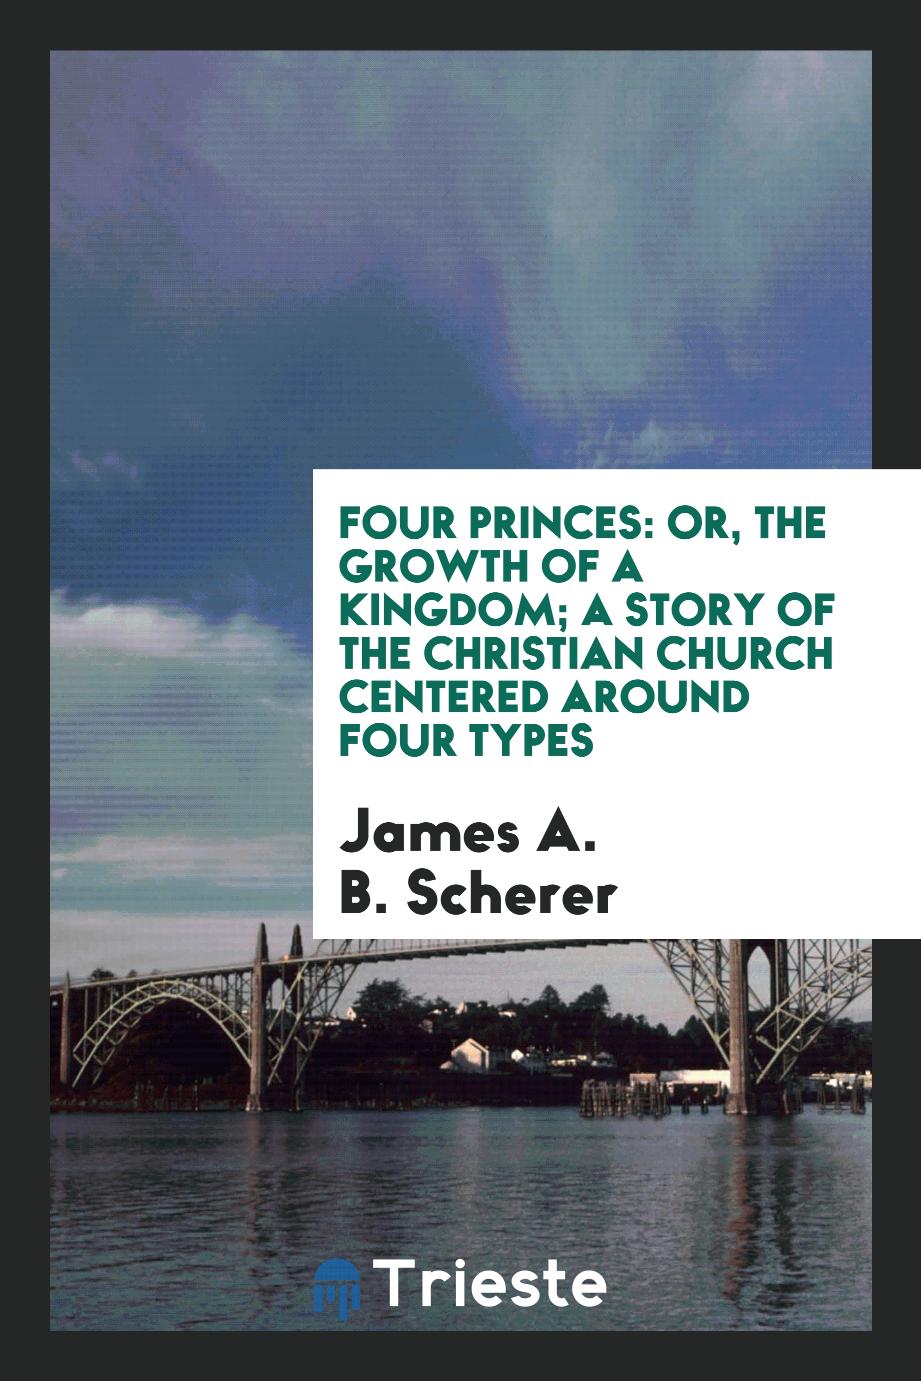 James A. B. Scherer - Four Princes: Or, The Growth of a Kingdom; a Story of the Christian Church Centered Around Four Types